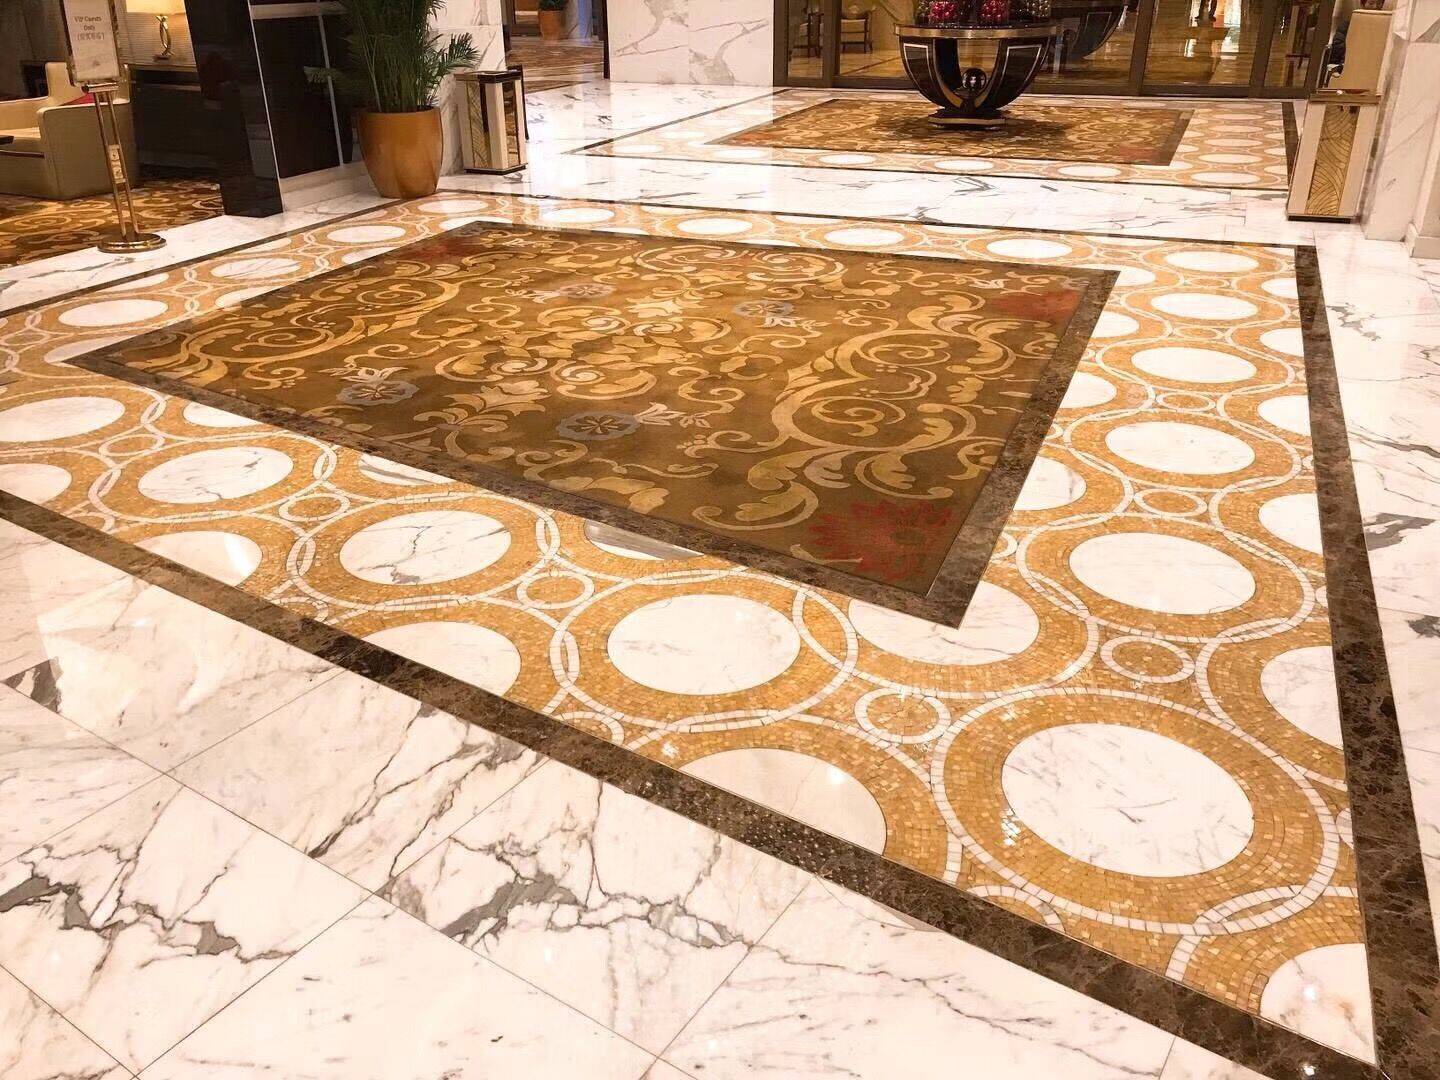 Marble and Shell mosaic pattern